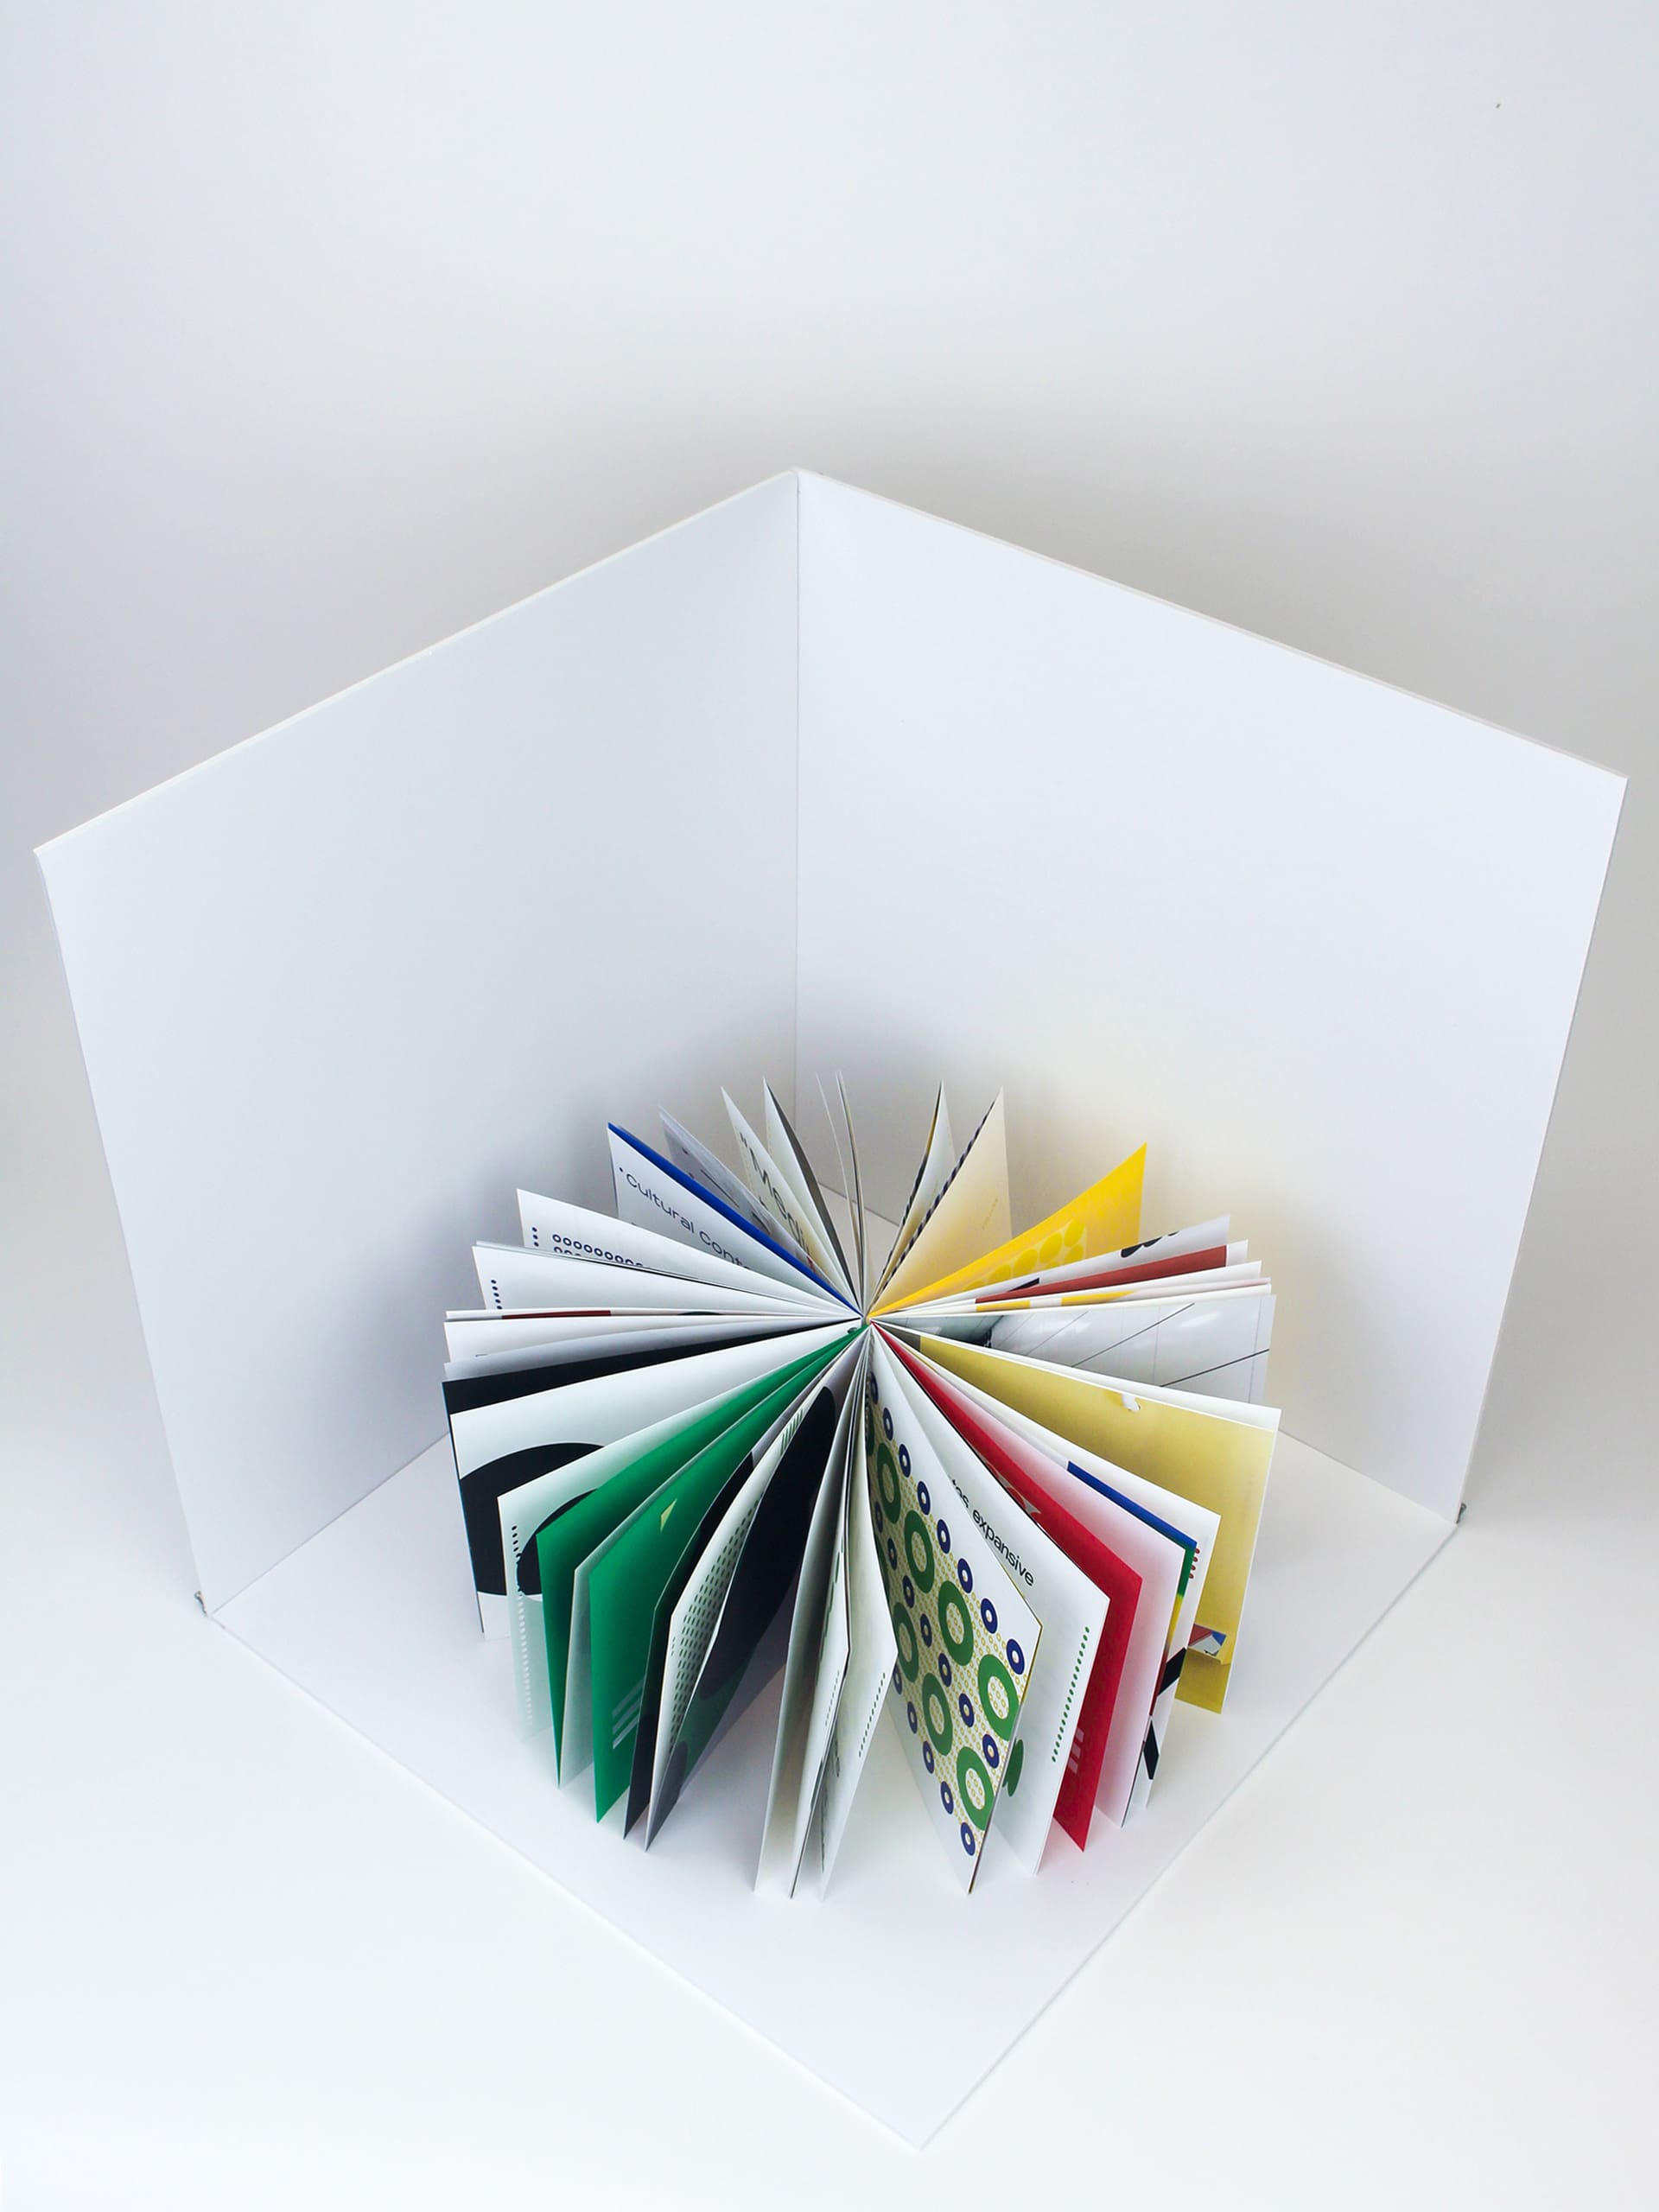 Photo of a book with yellow, red, blue, and green pages propped up and splayed out in a circle. Pictured in a white corner.